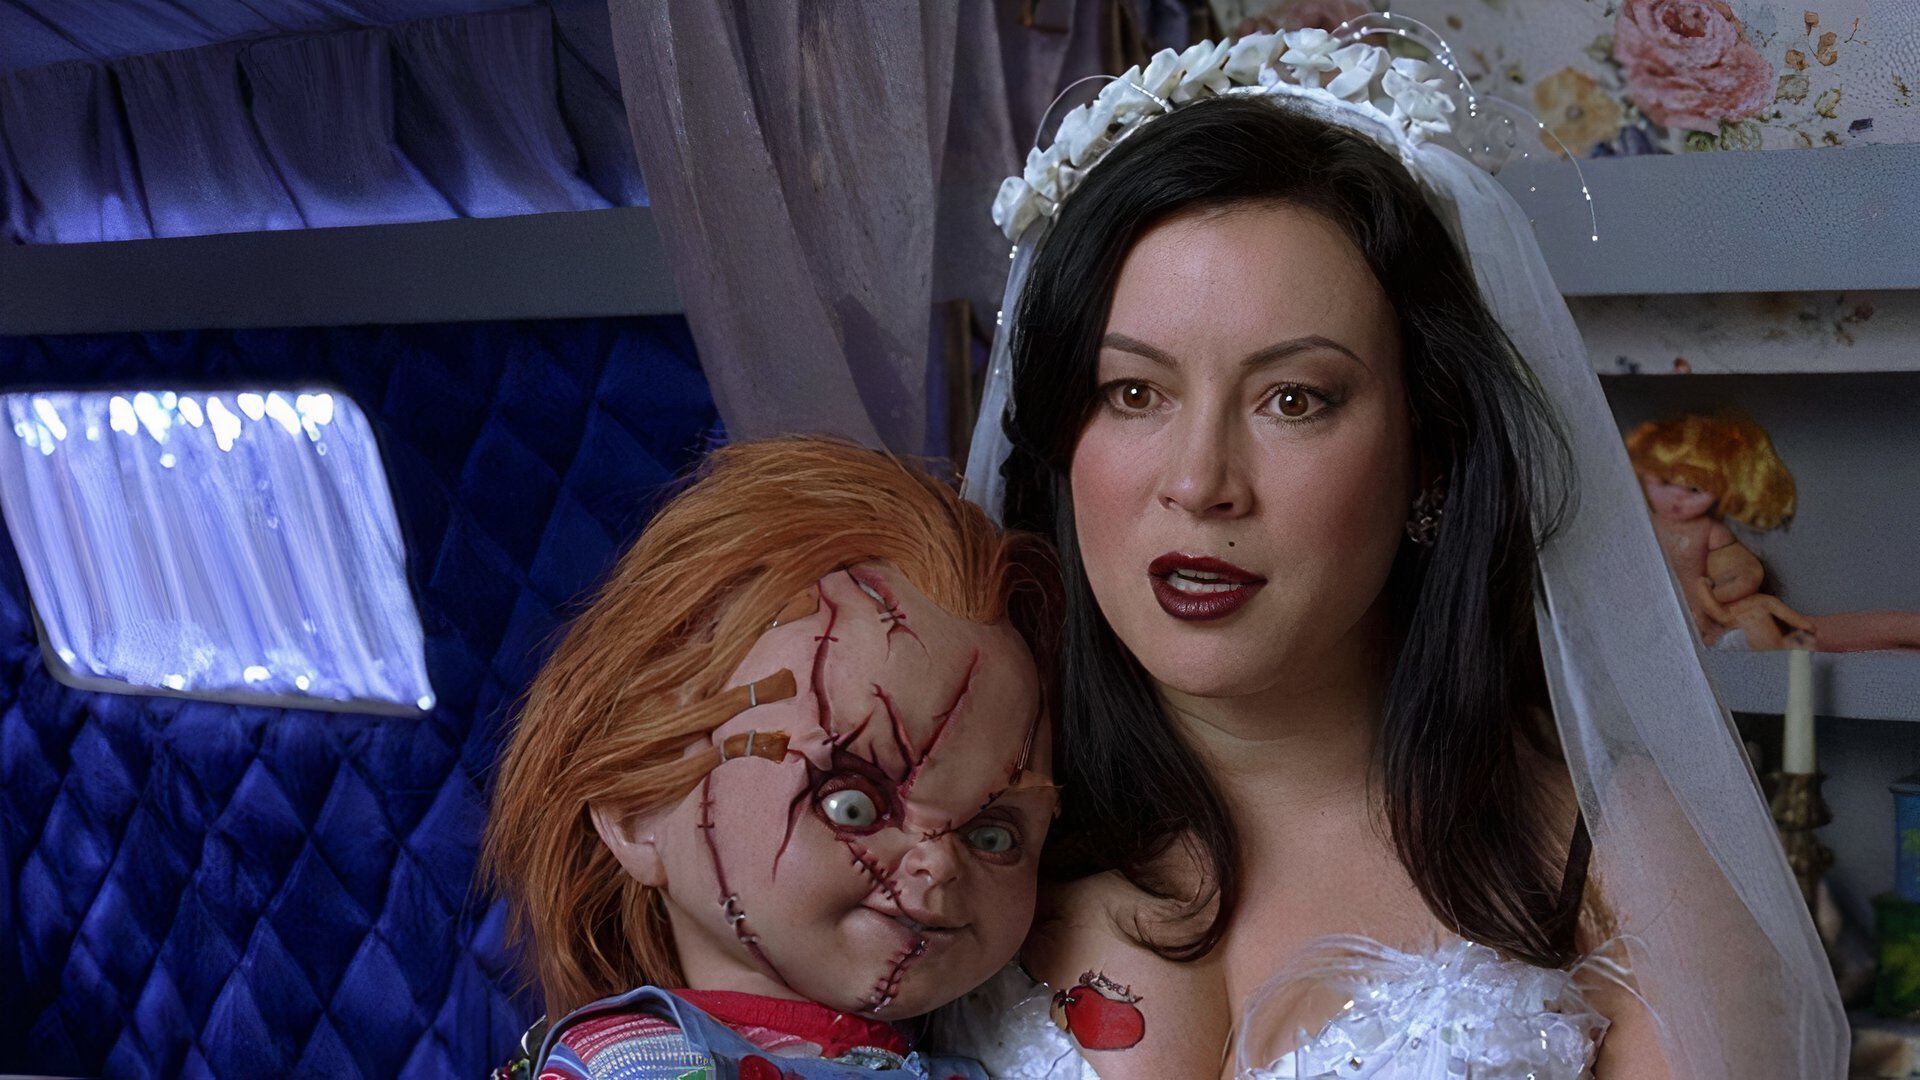 Child’s Play Actress Jennifer Tilly says Joining The Real Housewives of Beverly Hills is ‘Scarier than Chucky’